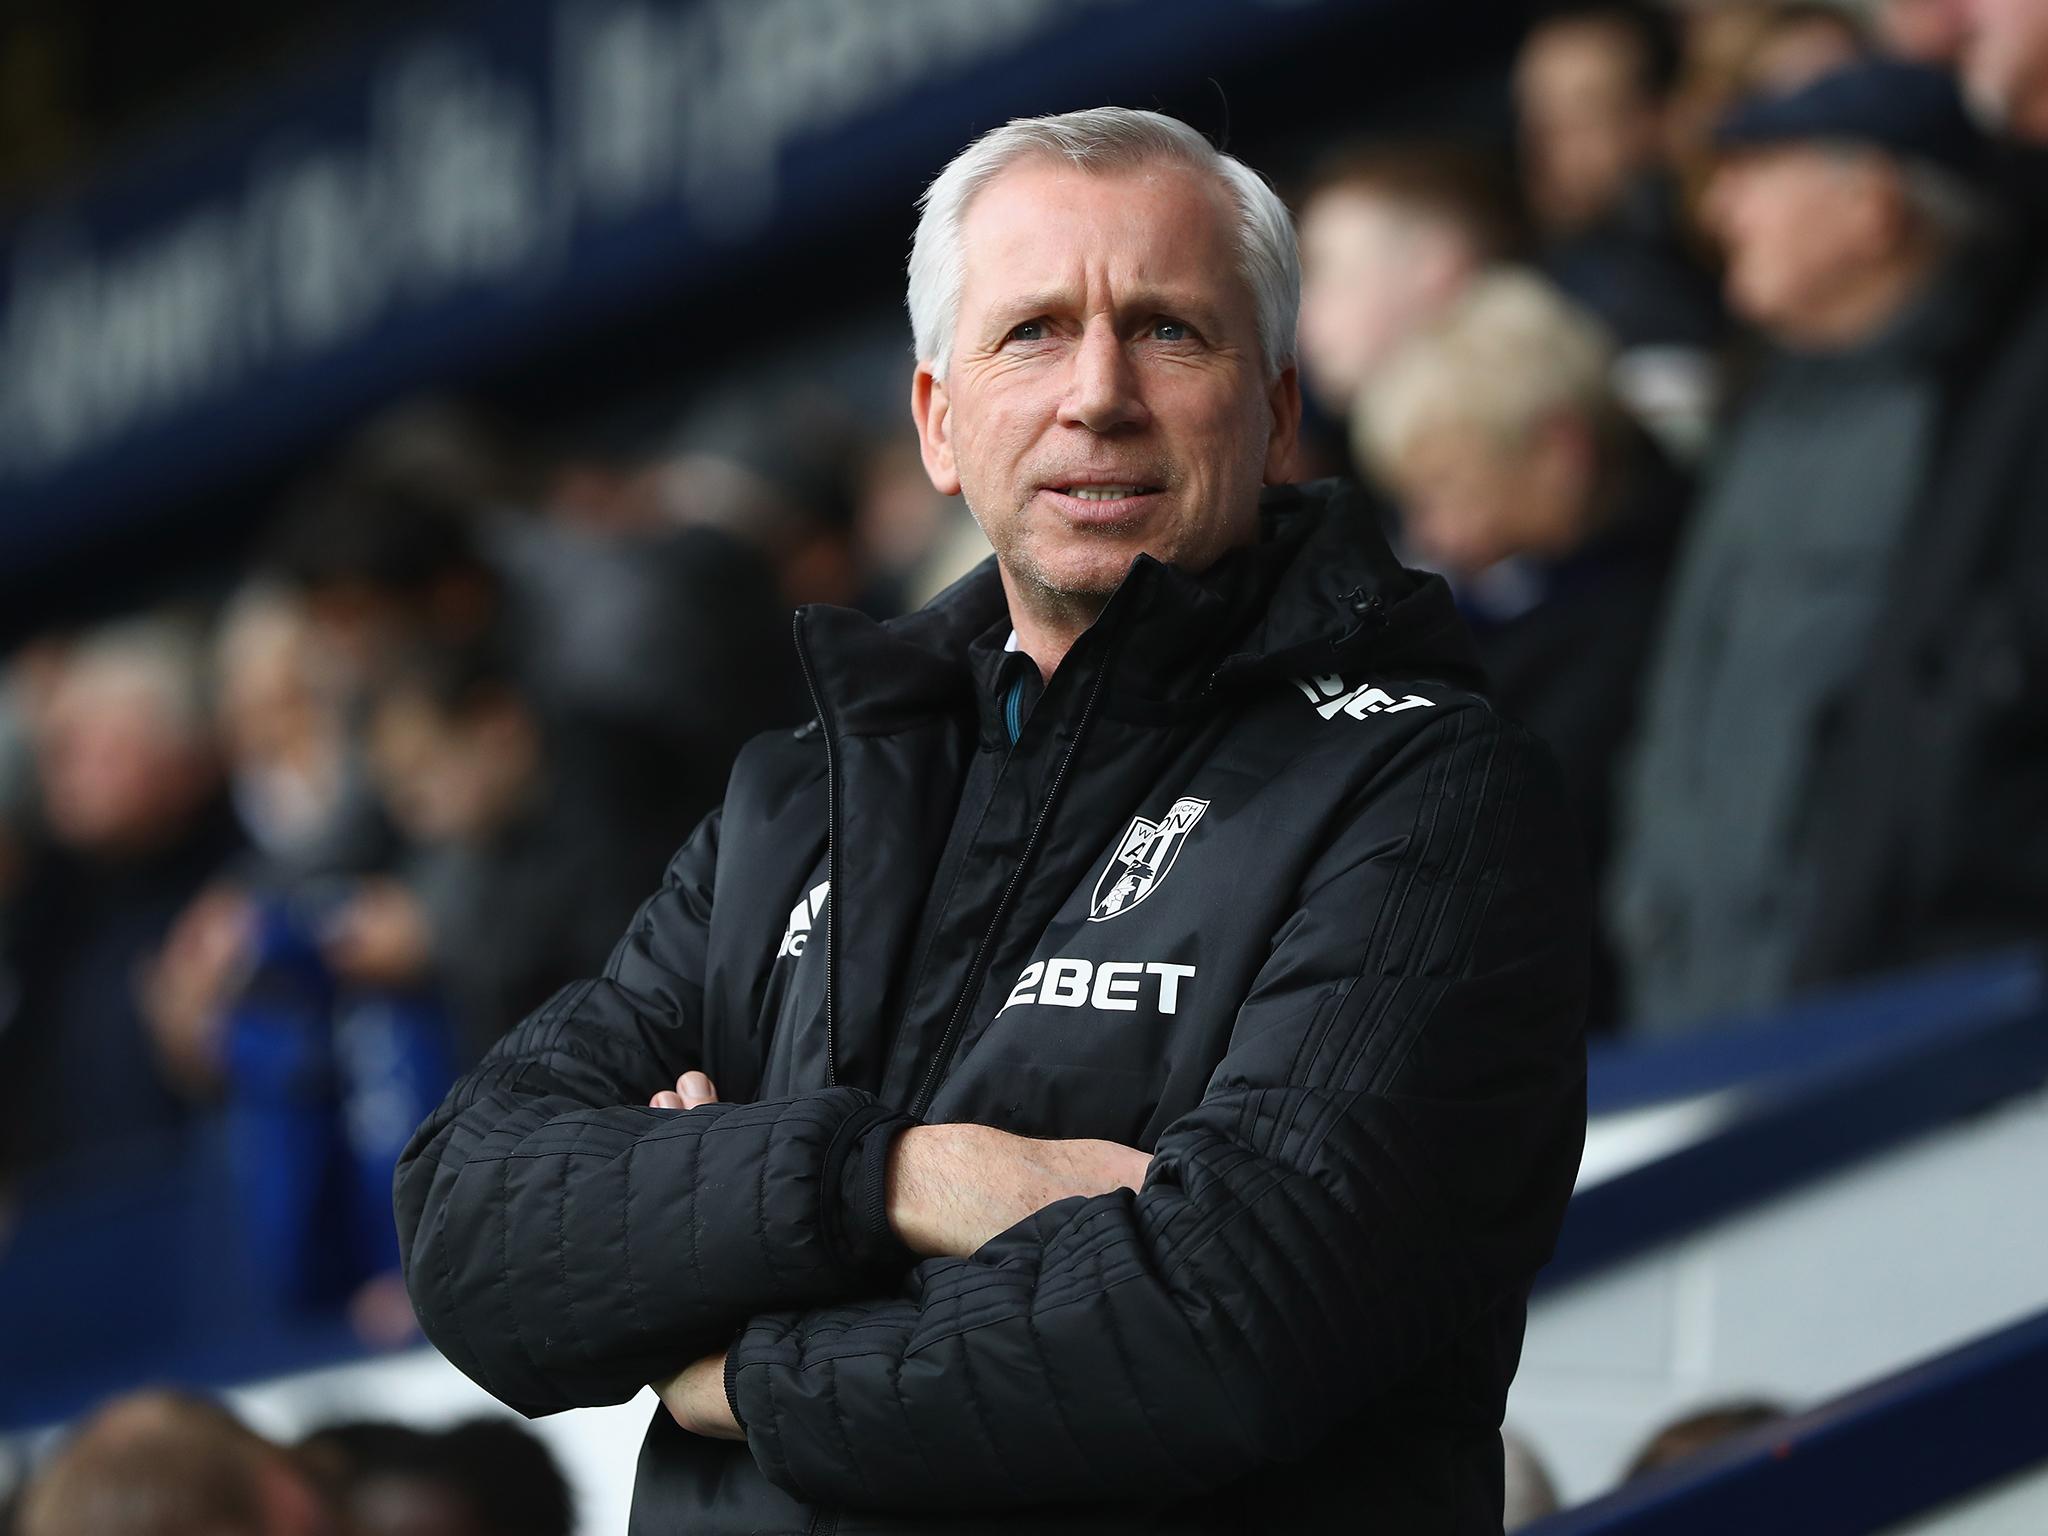 Alan Pardew will meet with the West Brom owners on Monday to discuss his future